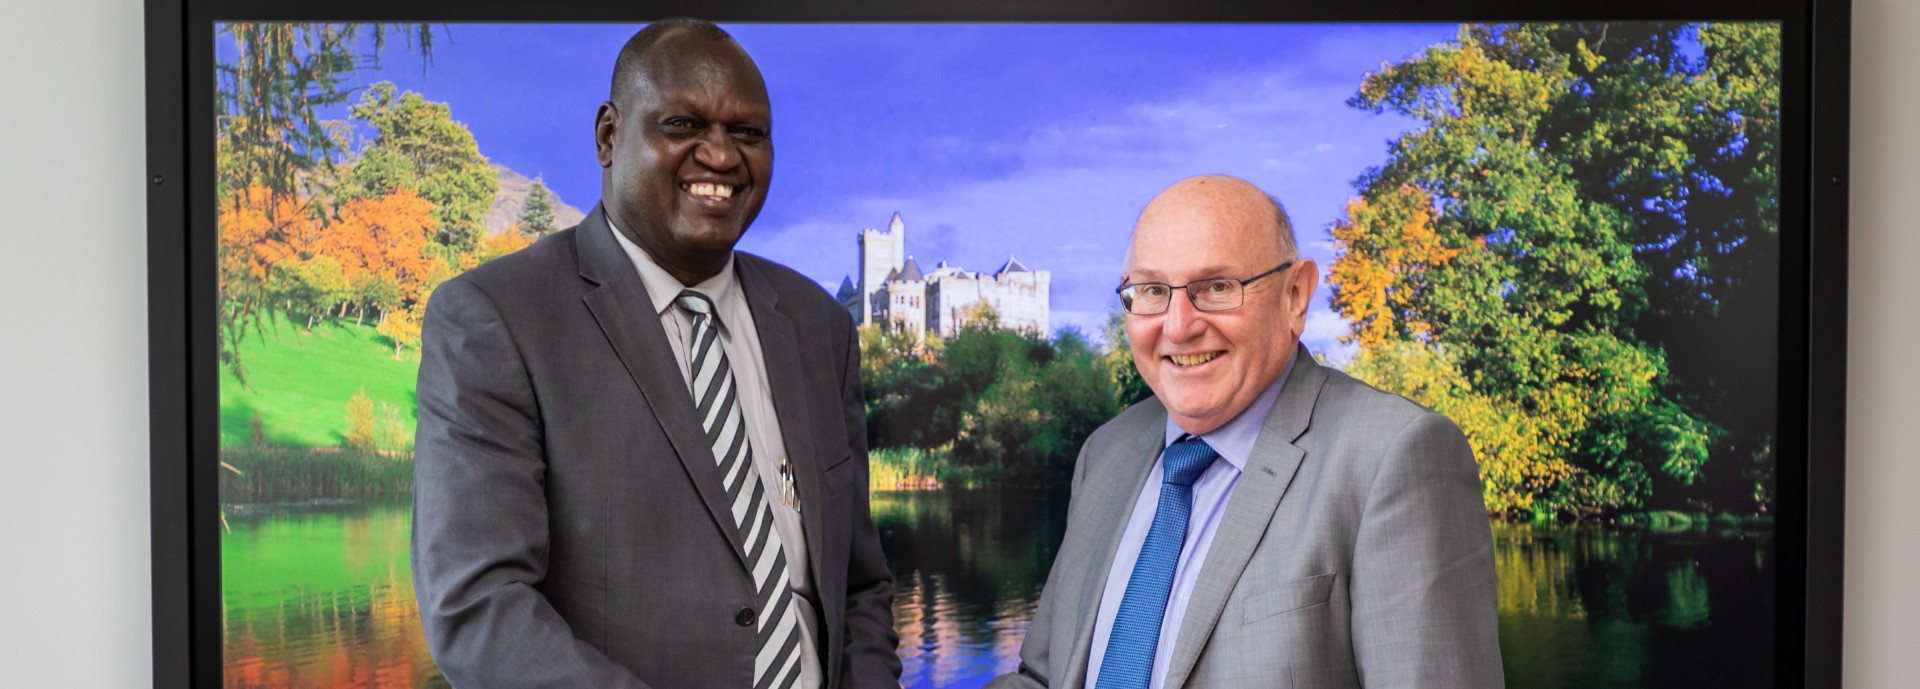 Professor Isaac Sanga Kosgey, Vice Chancellor of Moi University, and Professor Leigh Sparks, Deputy Principal of University of Stirling